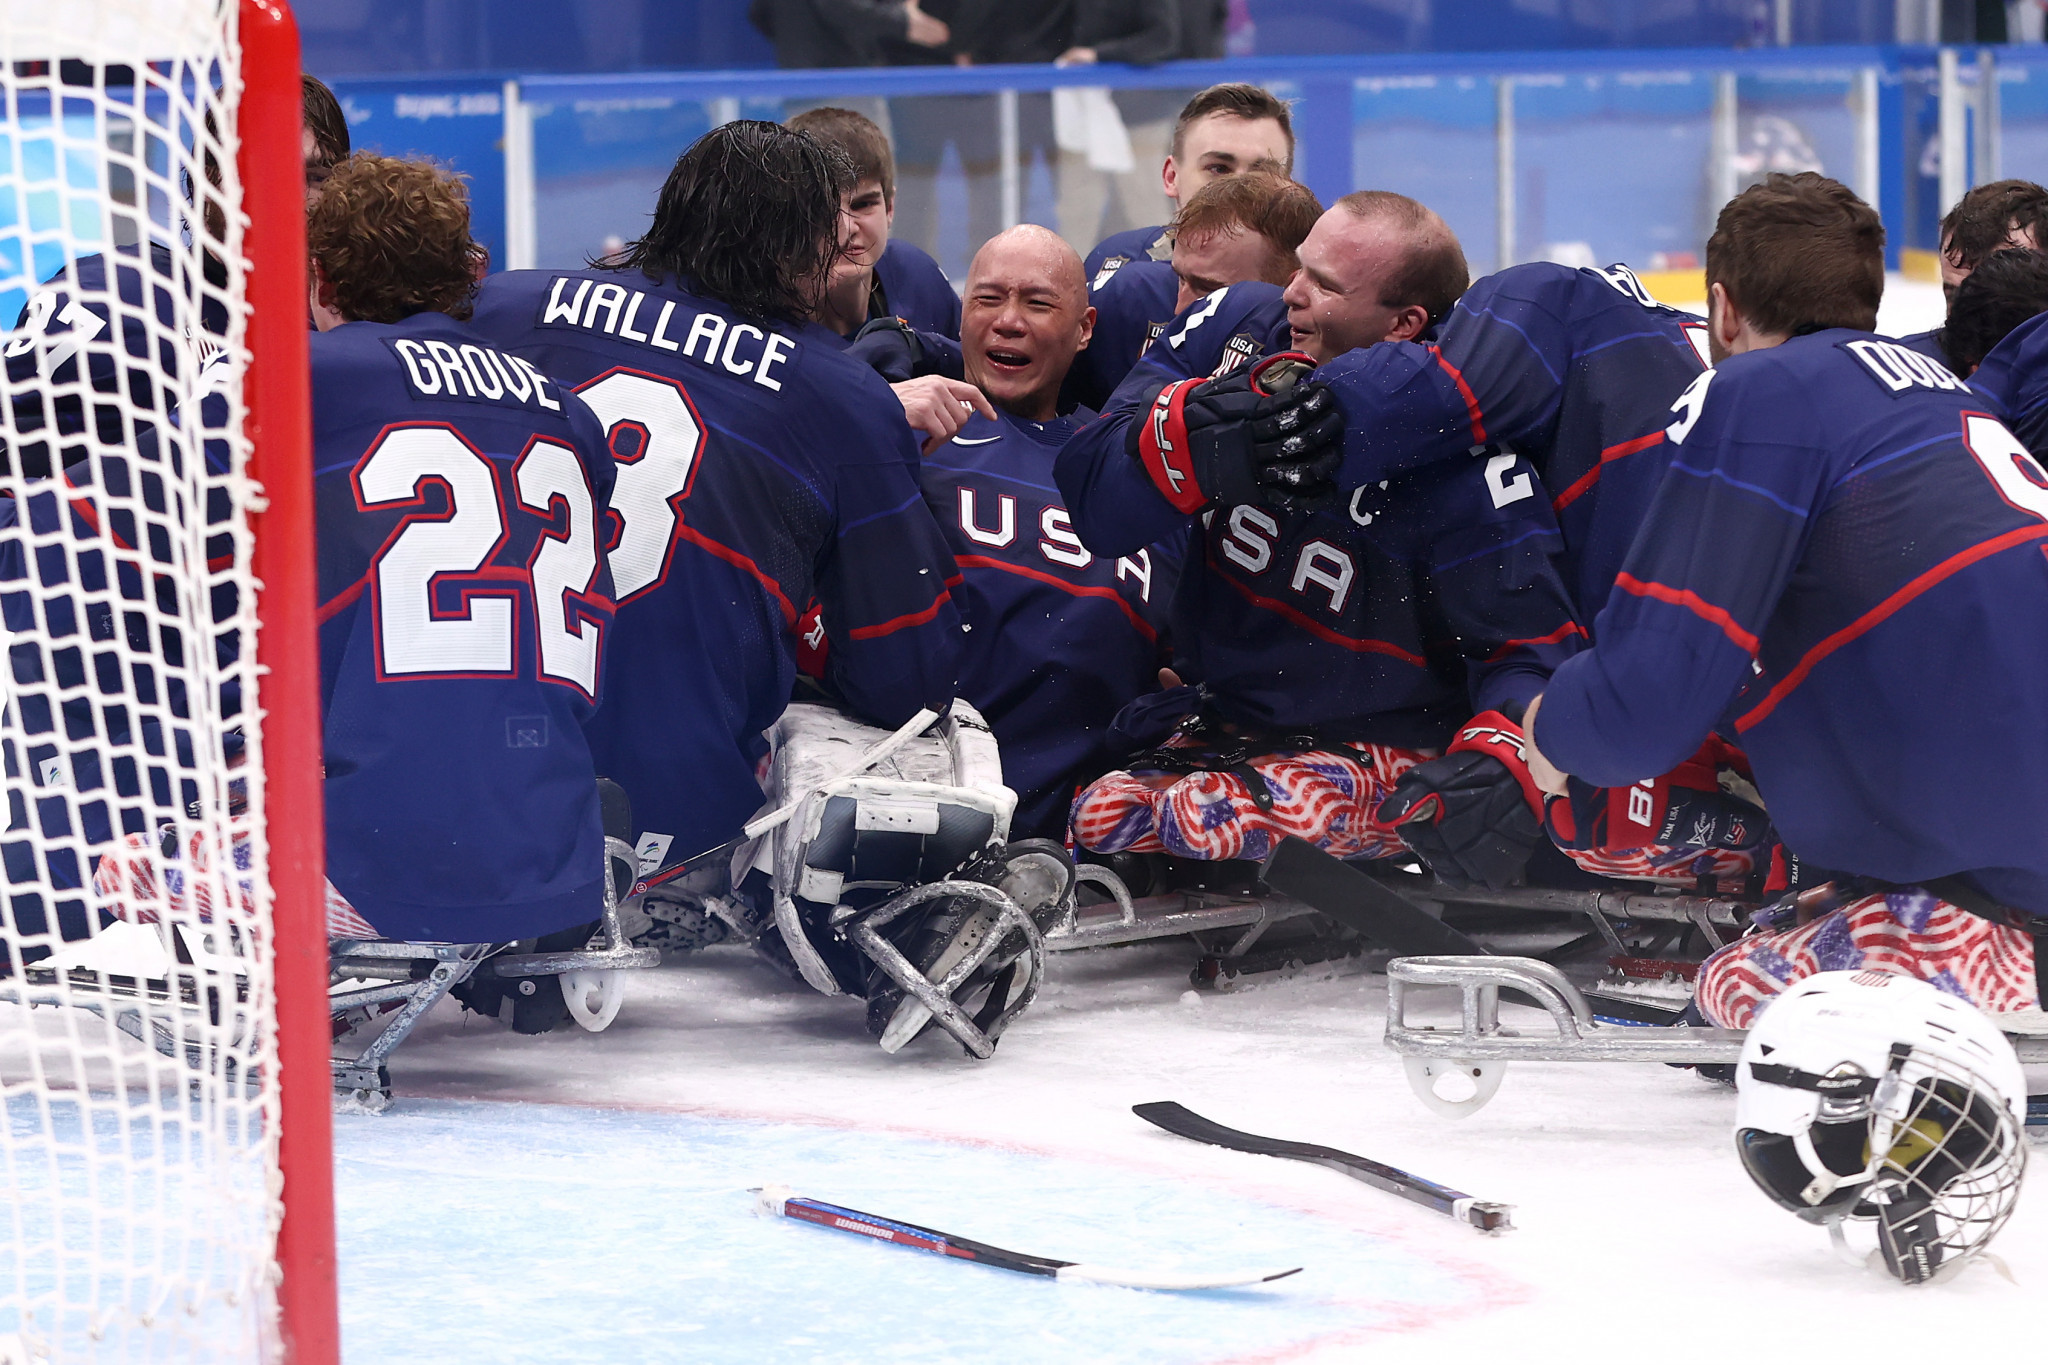 Jubilant celebrations ensued as soon as the final buzzer sounded, crowning the United States as champions ©Getty Images